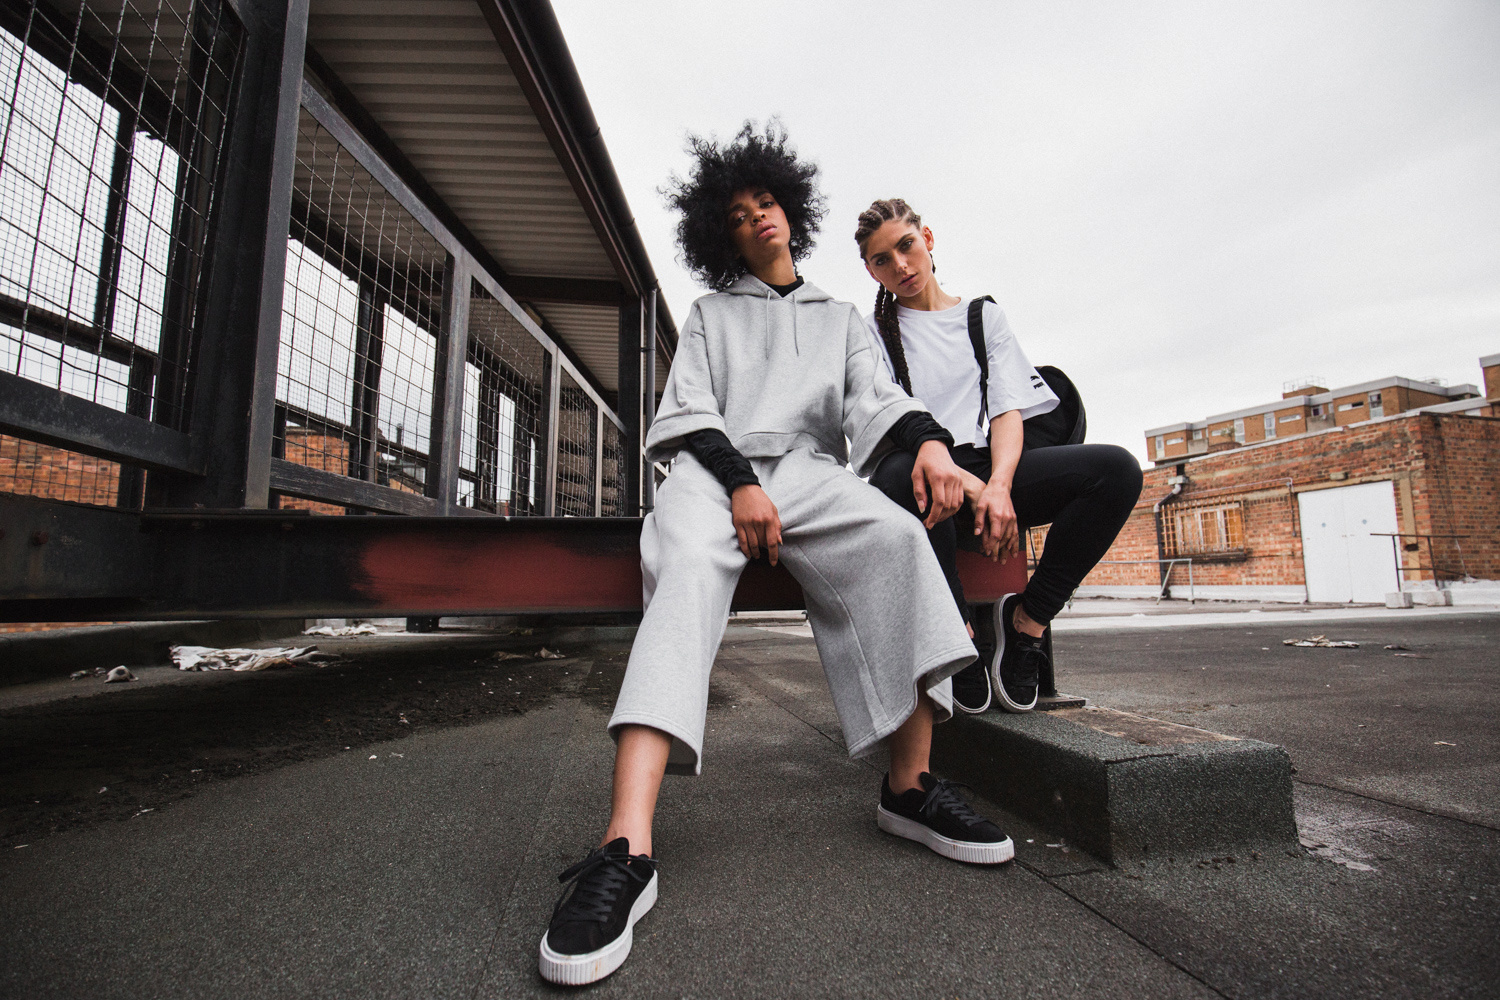 Woord haar rijst PUMA's 2016 Fall/Winter Sportstyle Apparel Is For Your Everyday — CNK Daily  (ChicksNKicks)